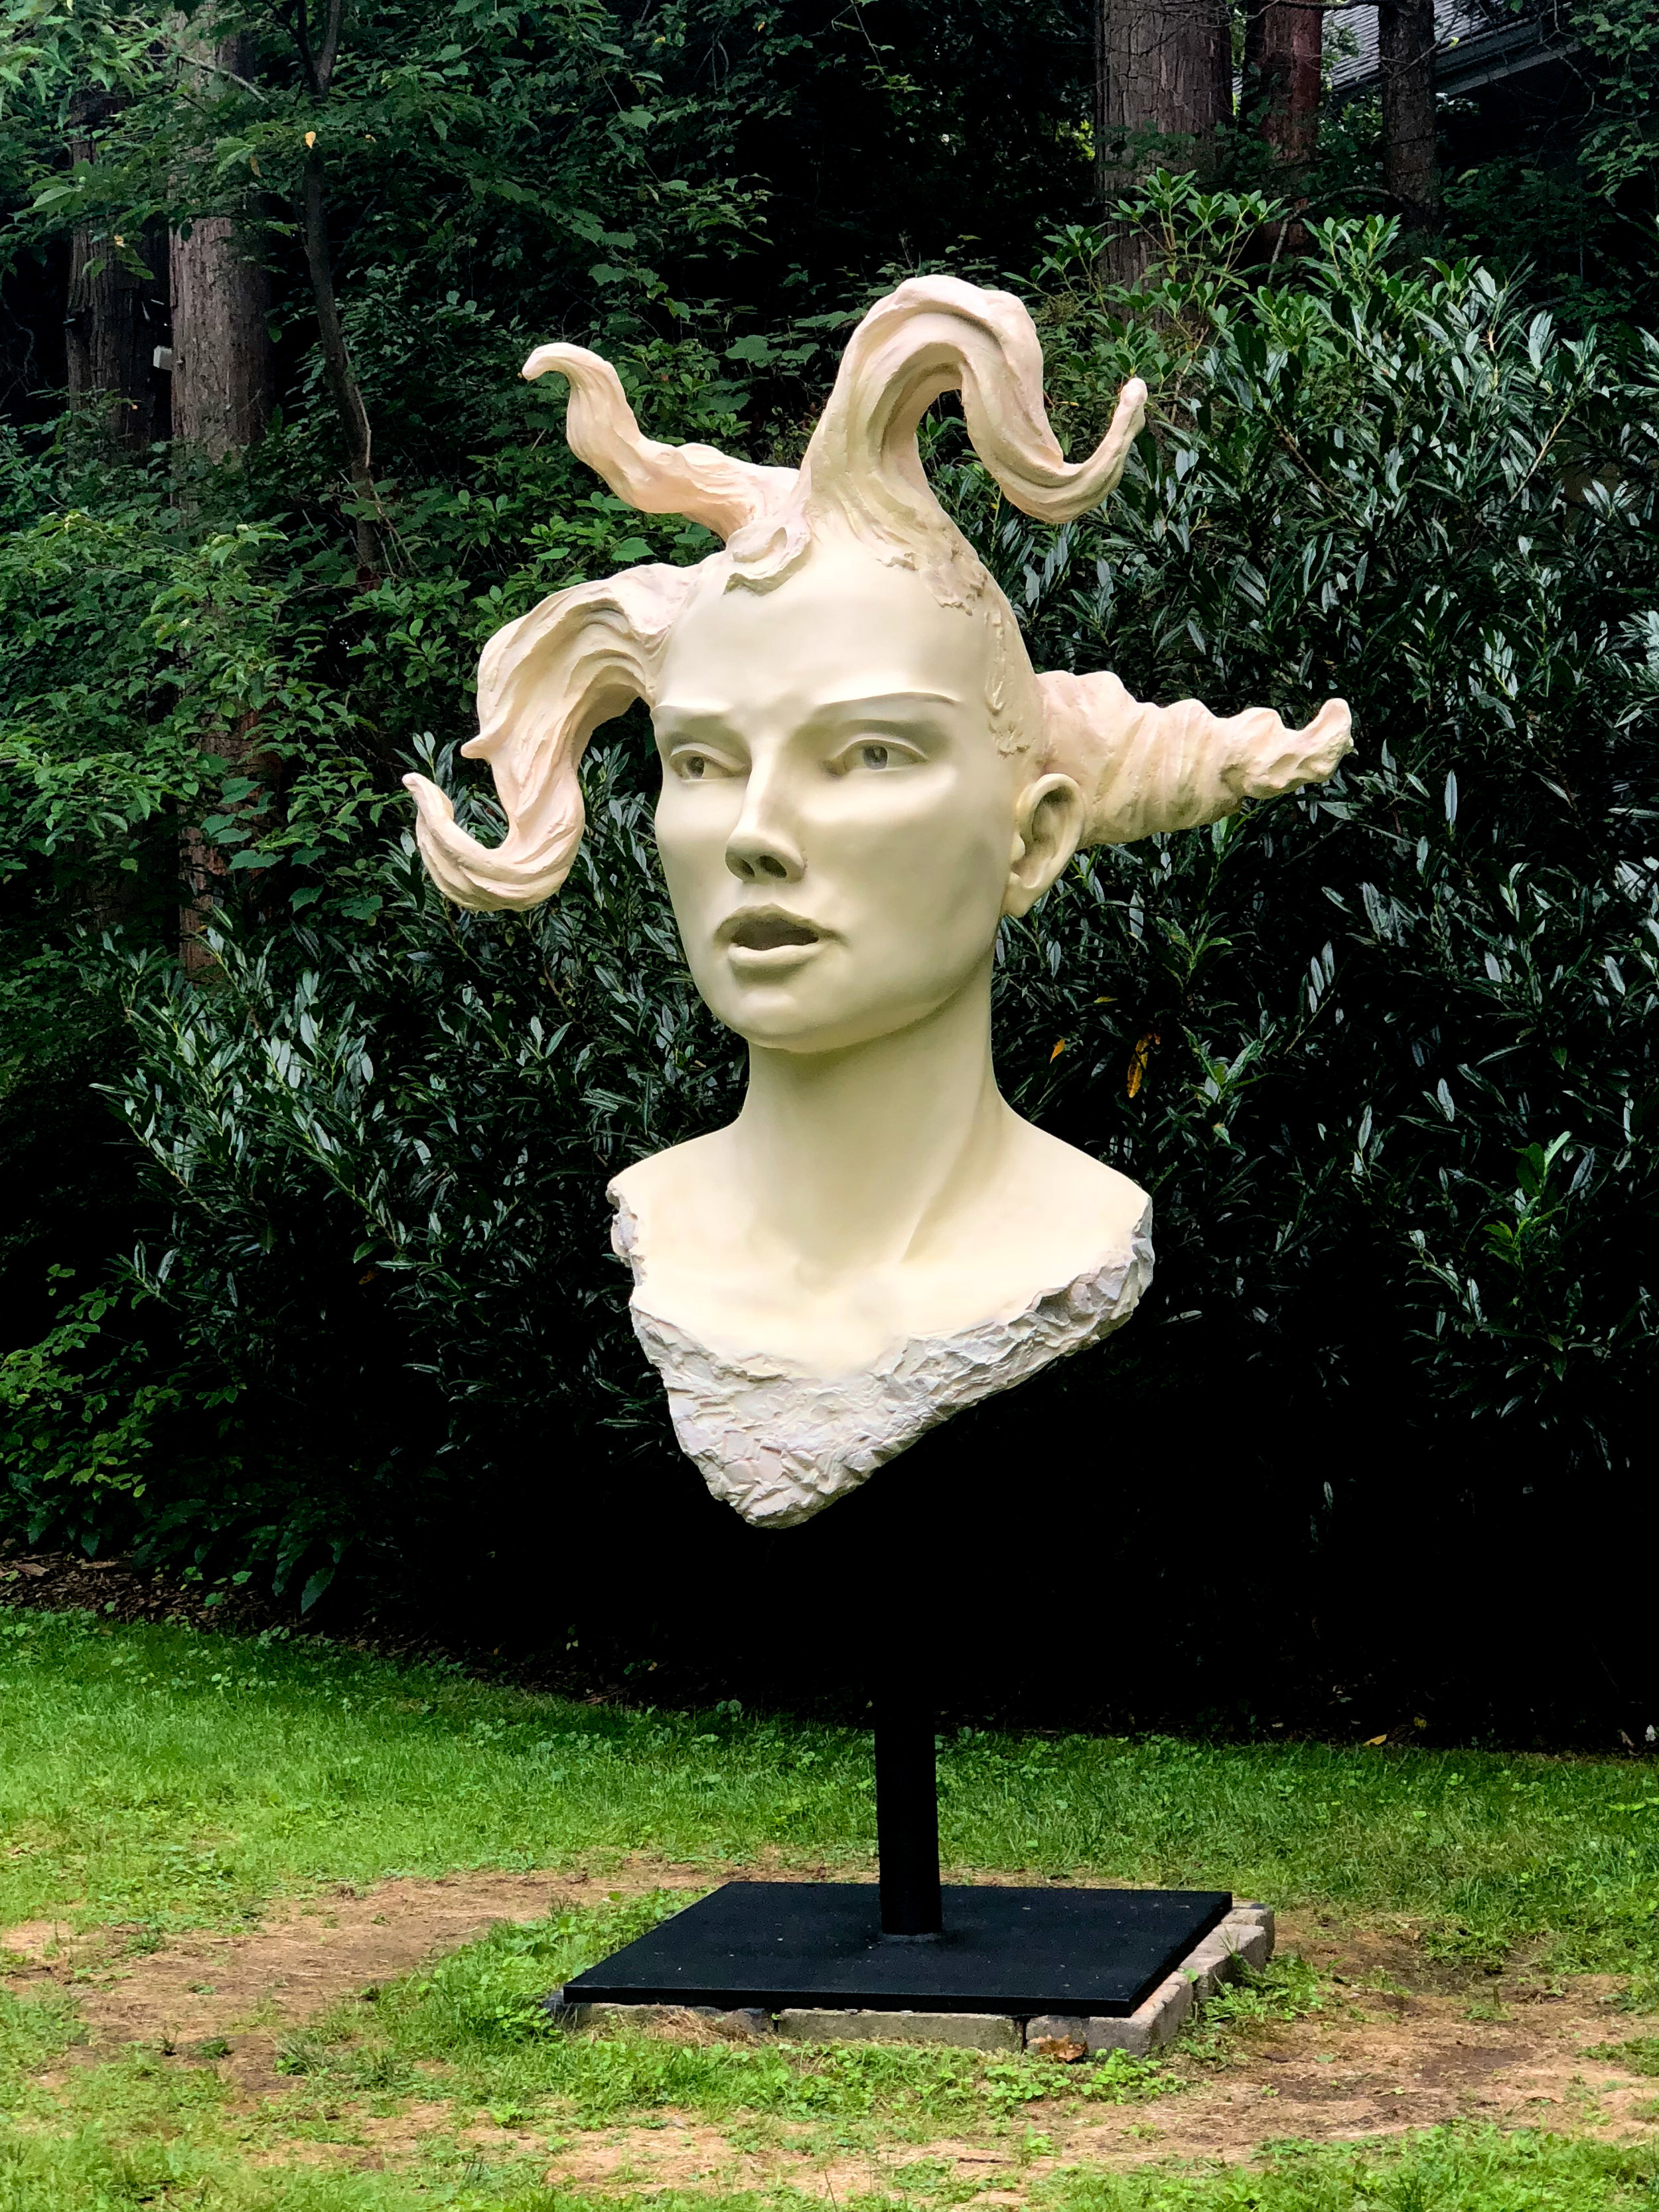  Emma, cast bronze with cream patina, 84”H x 48”W x 30”D, 2014-2018. Edition of 6 